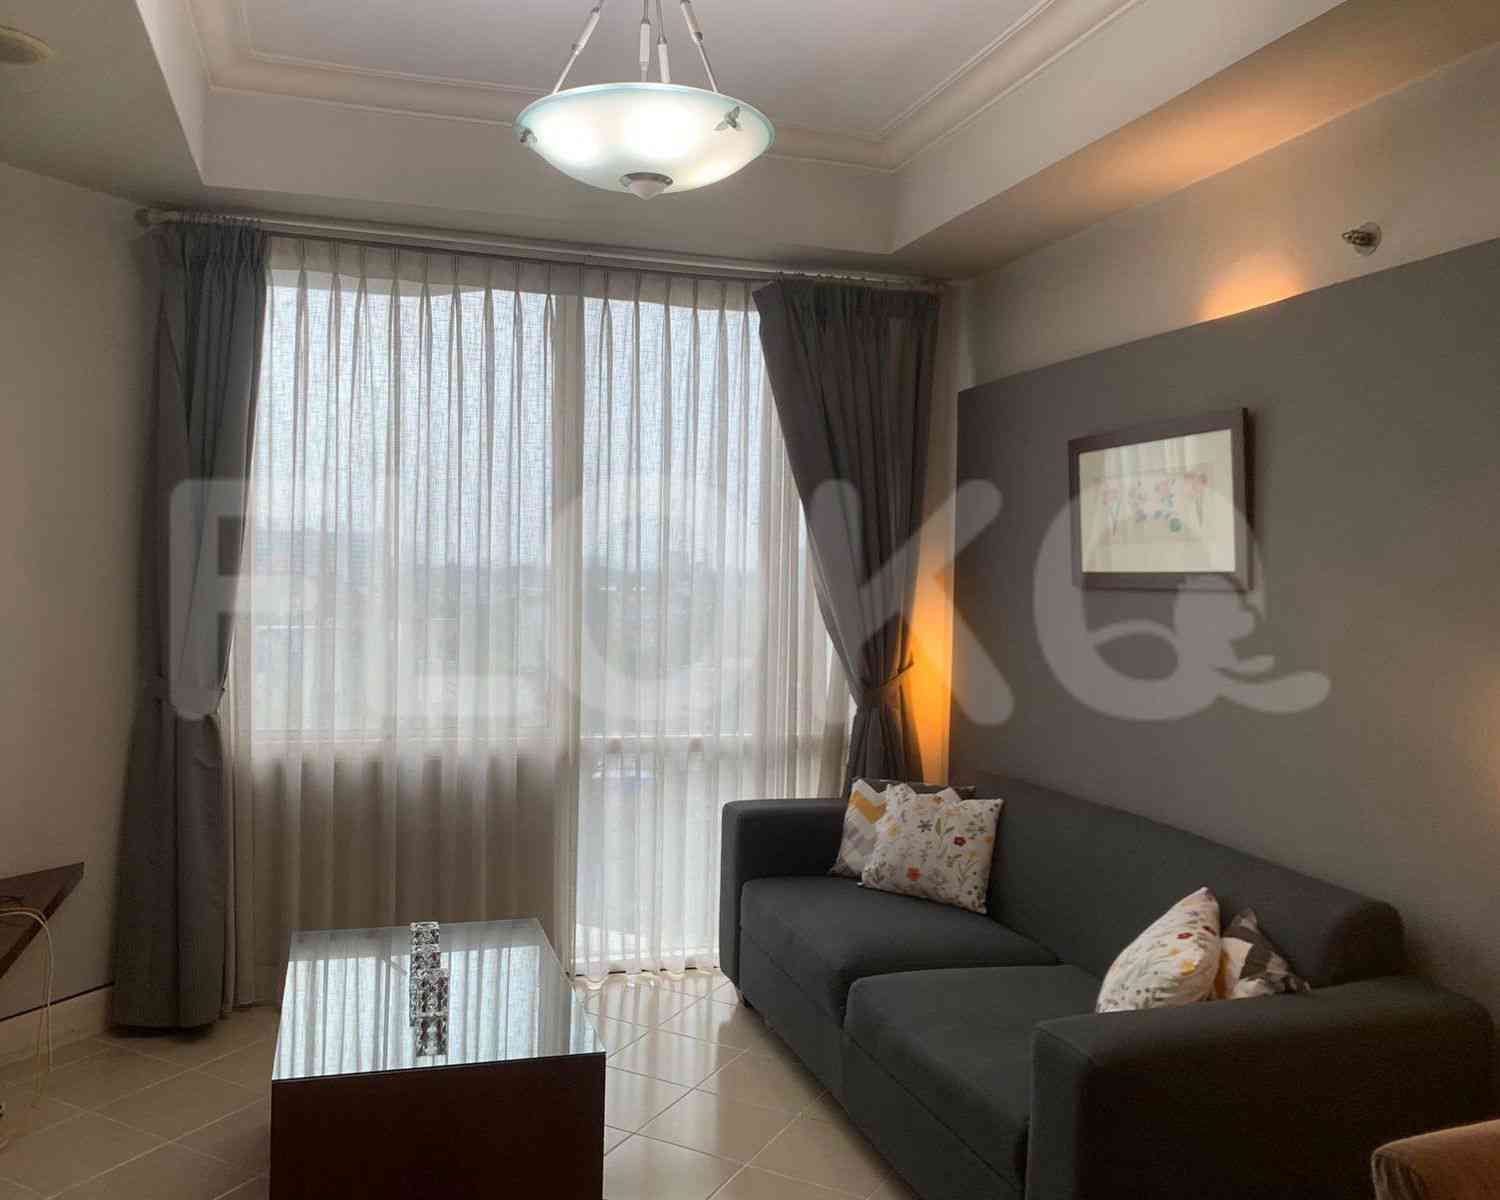 1 Bedroom on 6th Floor for Rent in Batavia Apartment - fbe5c2 1